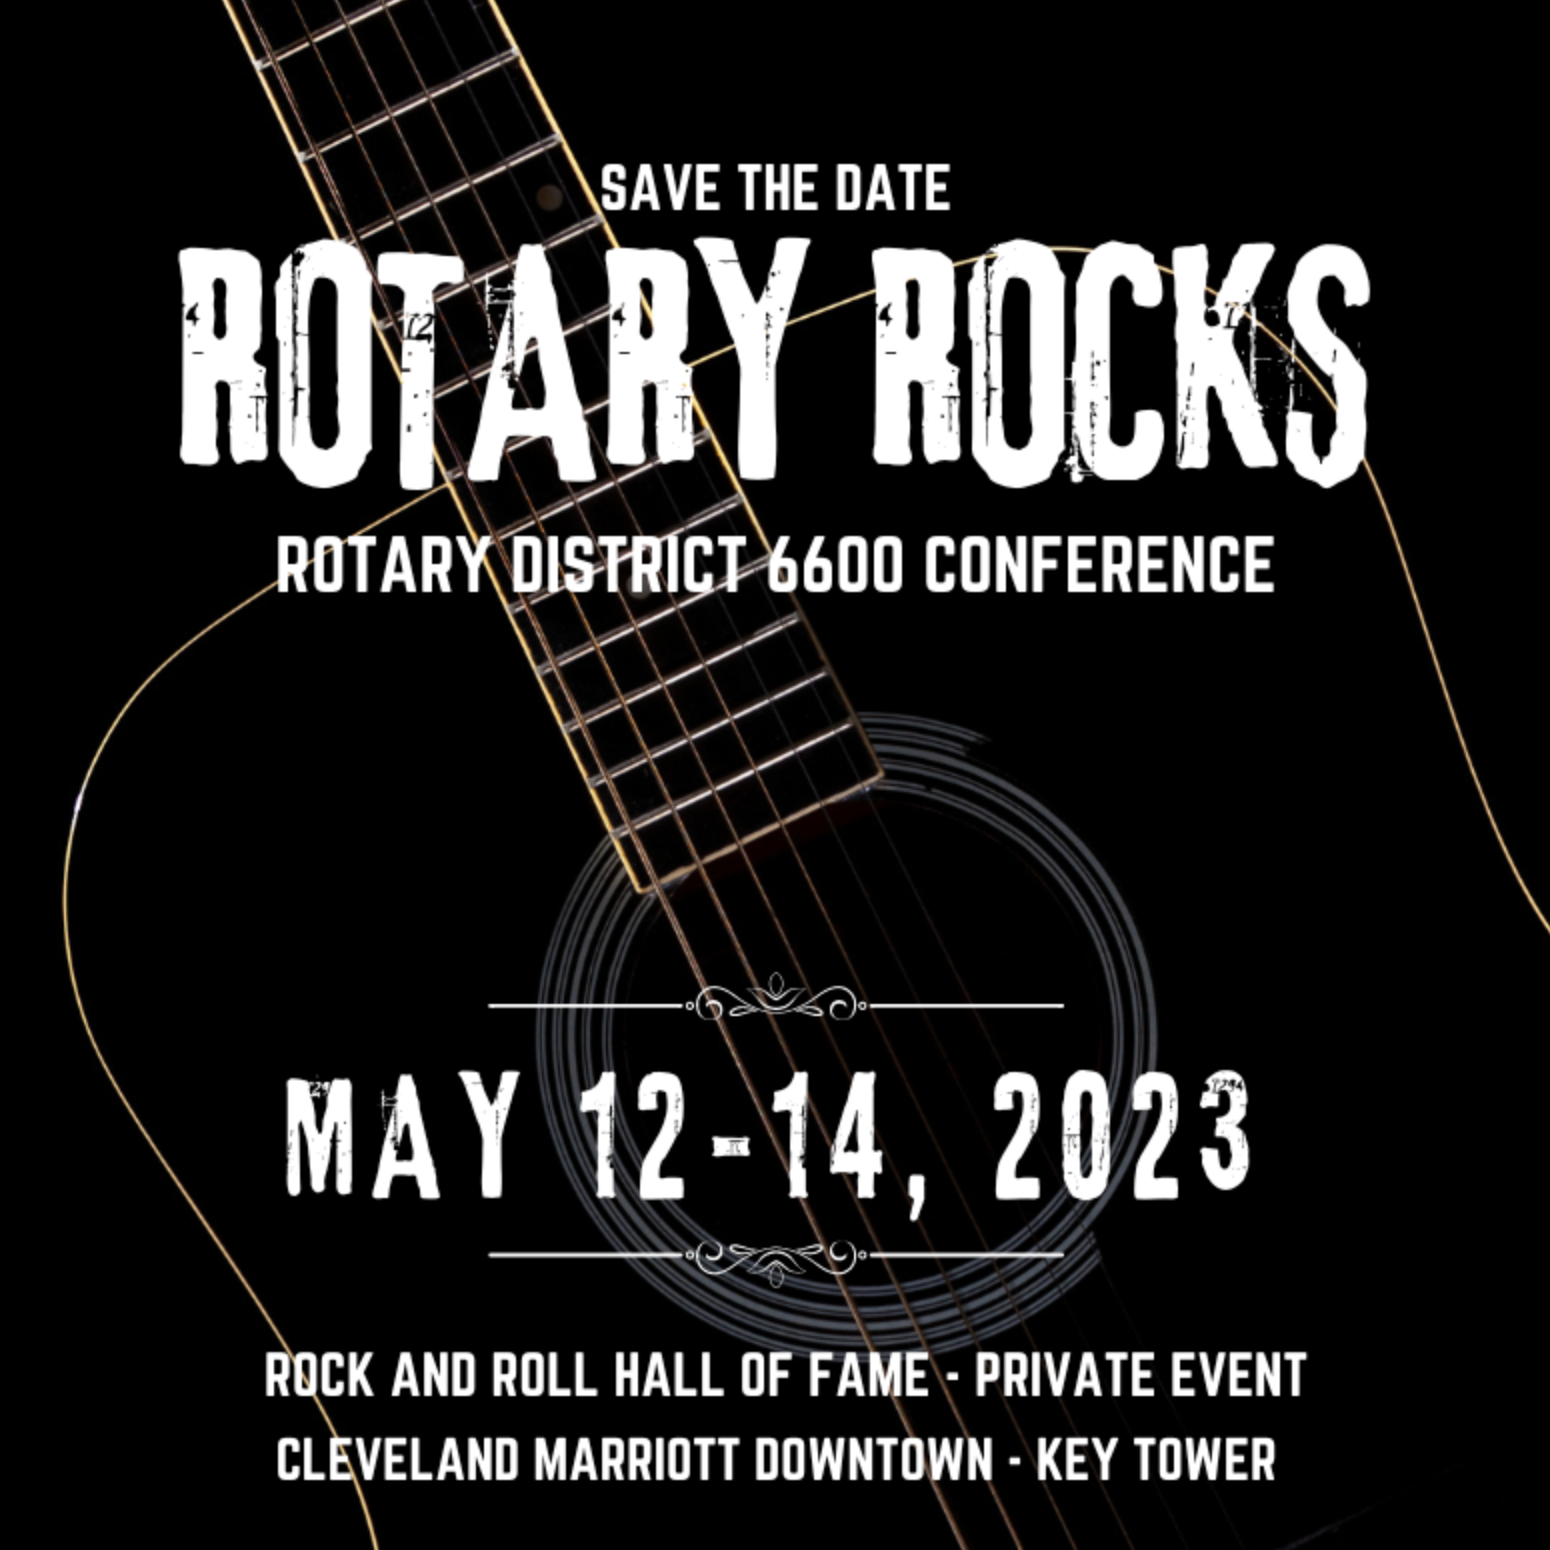 Save The Date – Rotary Rocks